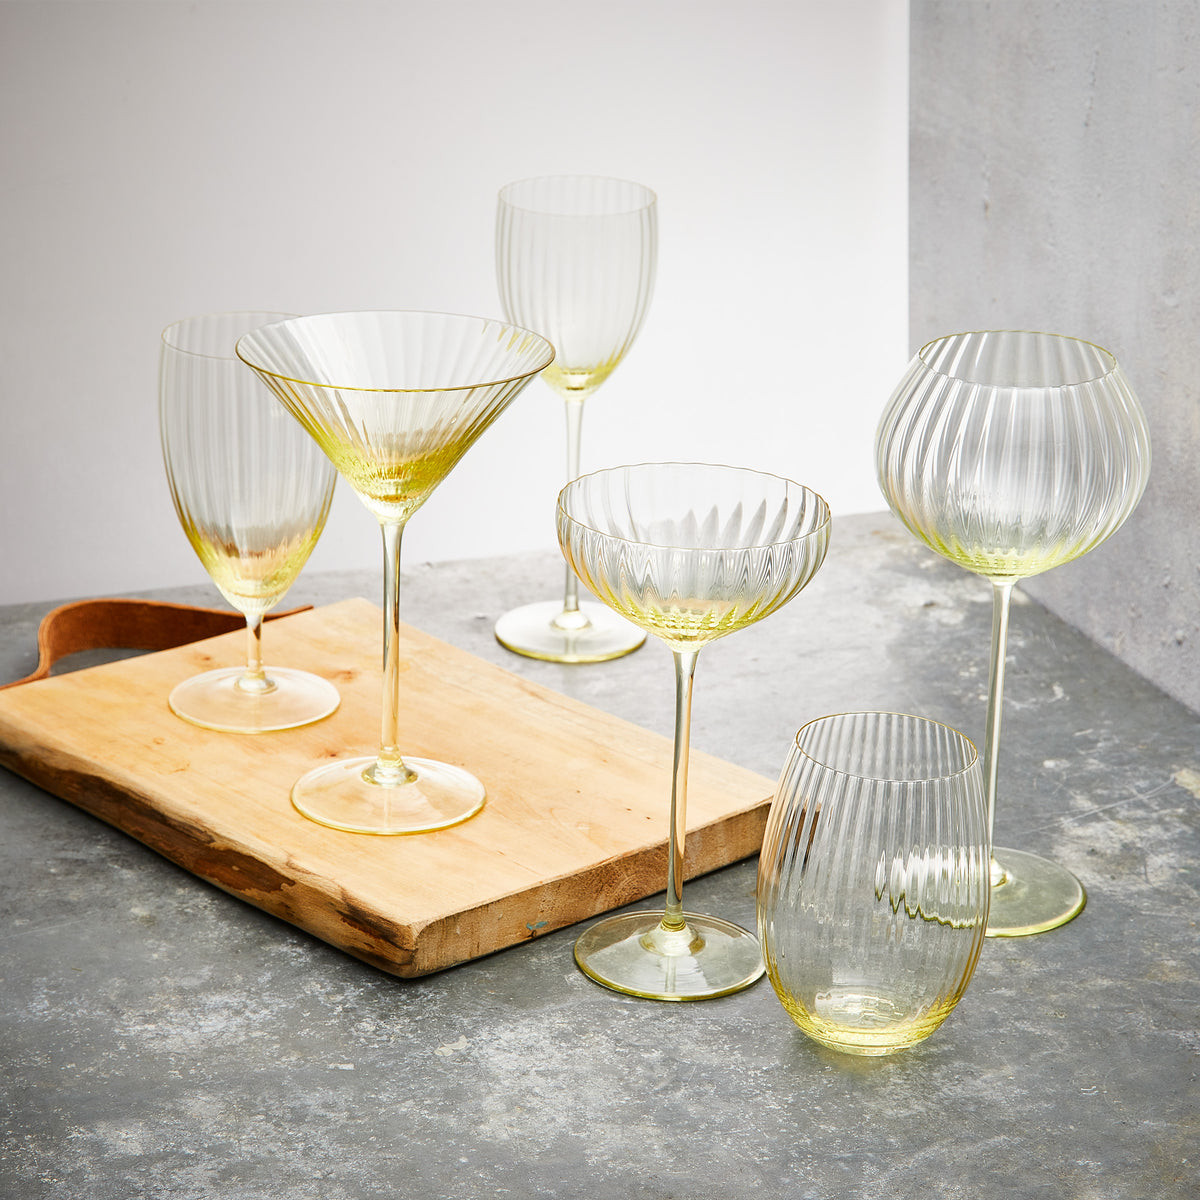 Quinn citrine yellow mouth-blown crystal white wine glasses from Caskata.